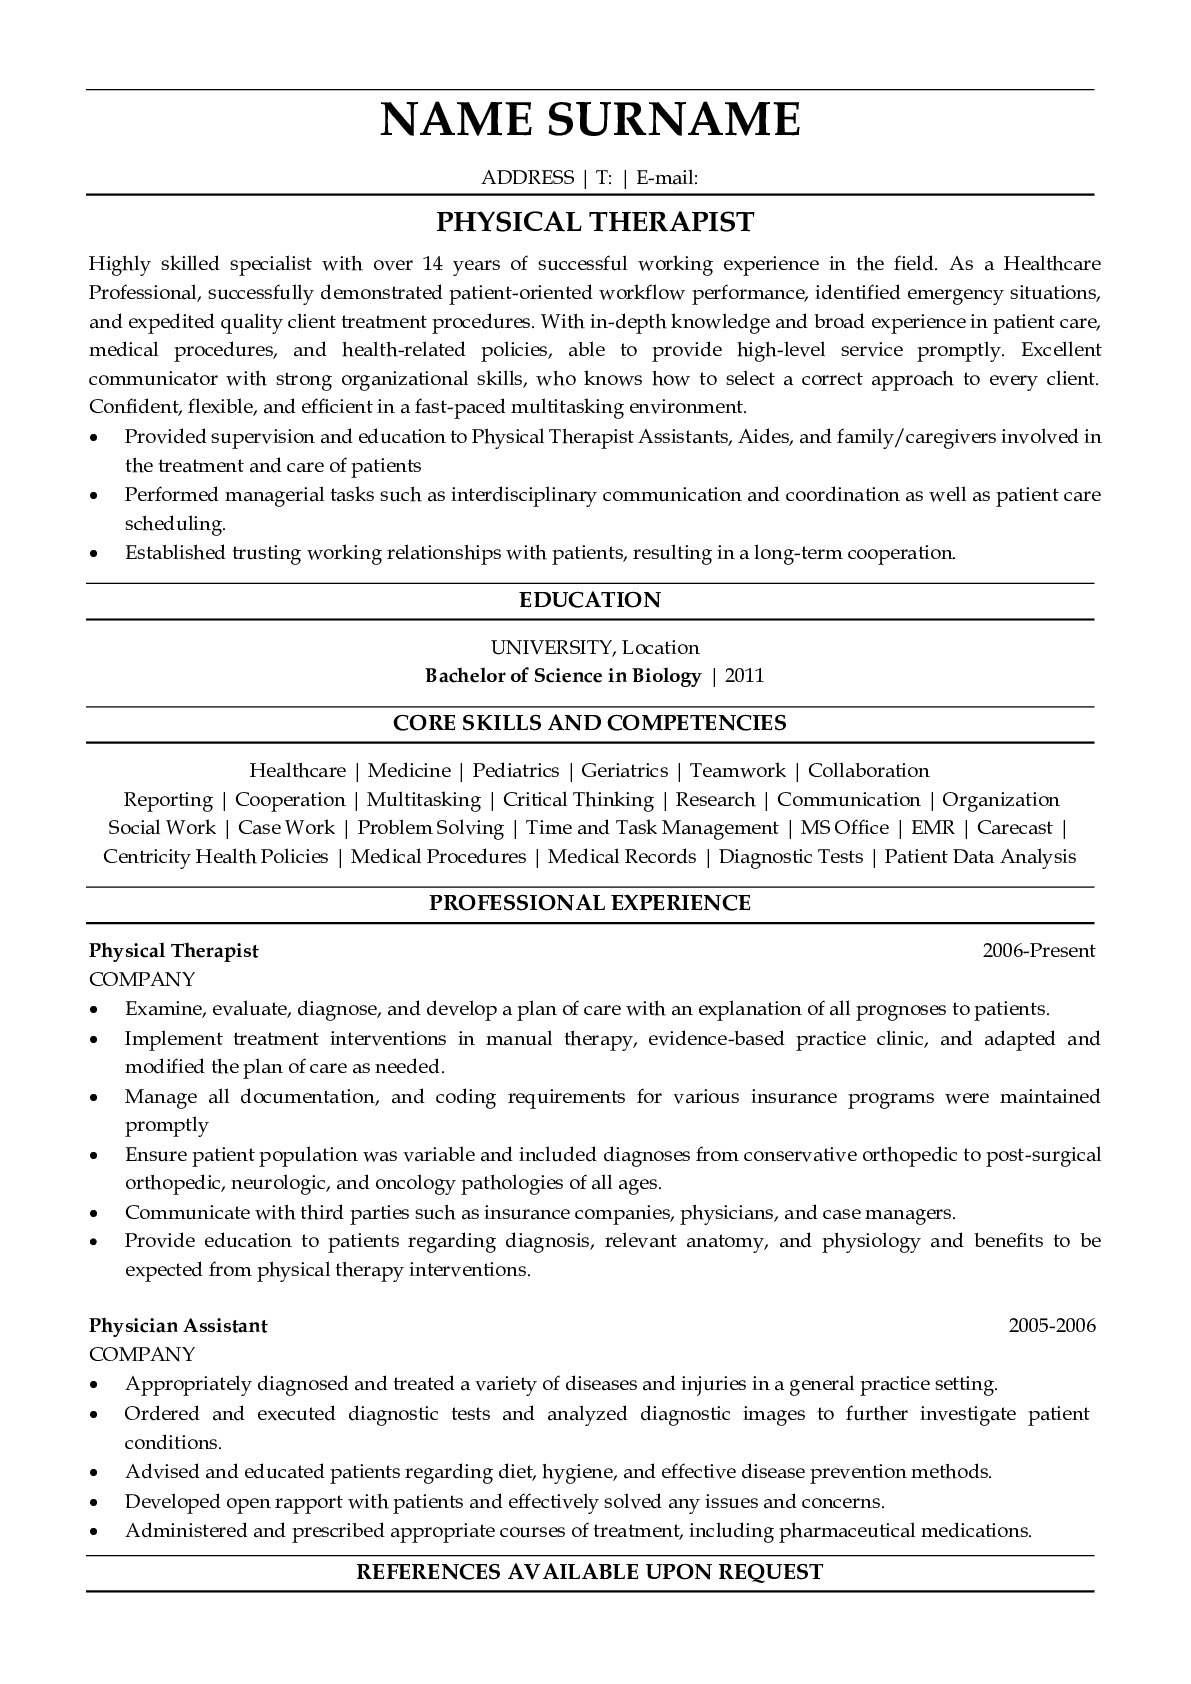 Resume Example for Physical Therapist